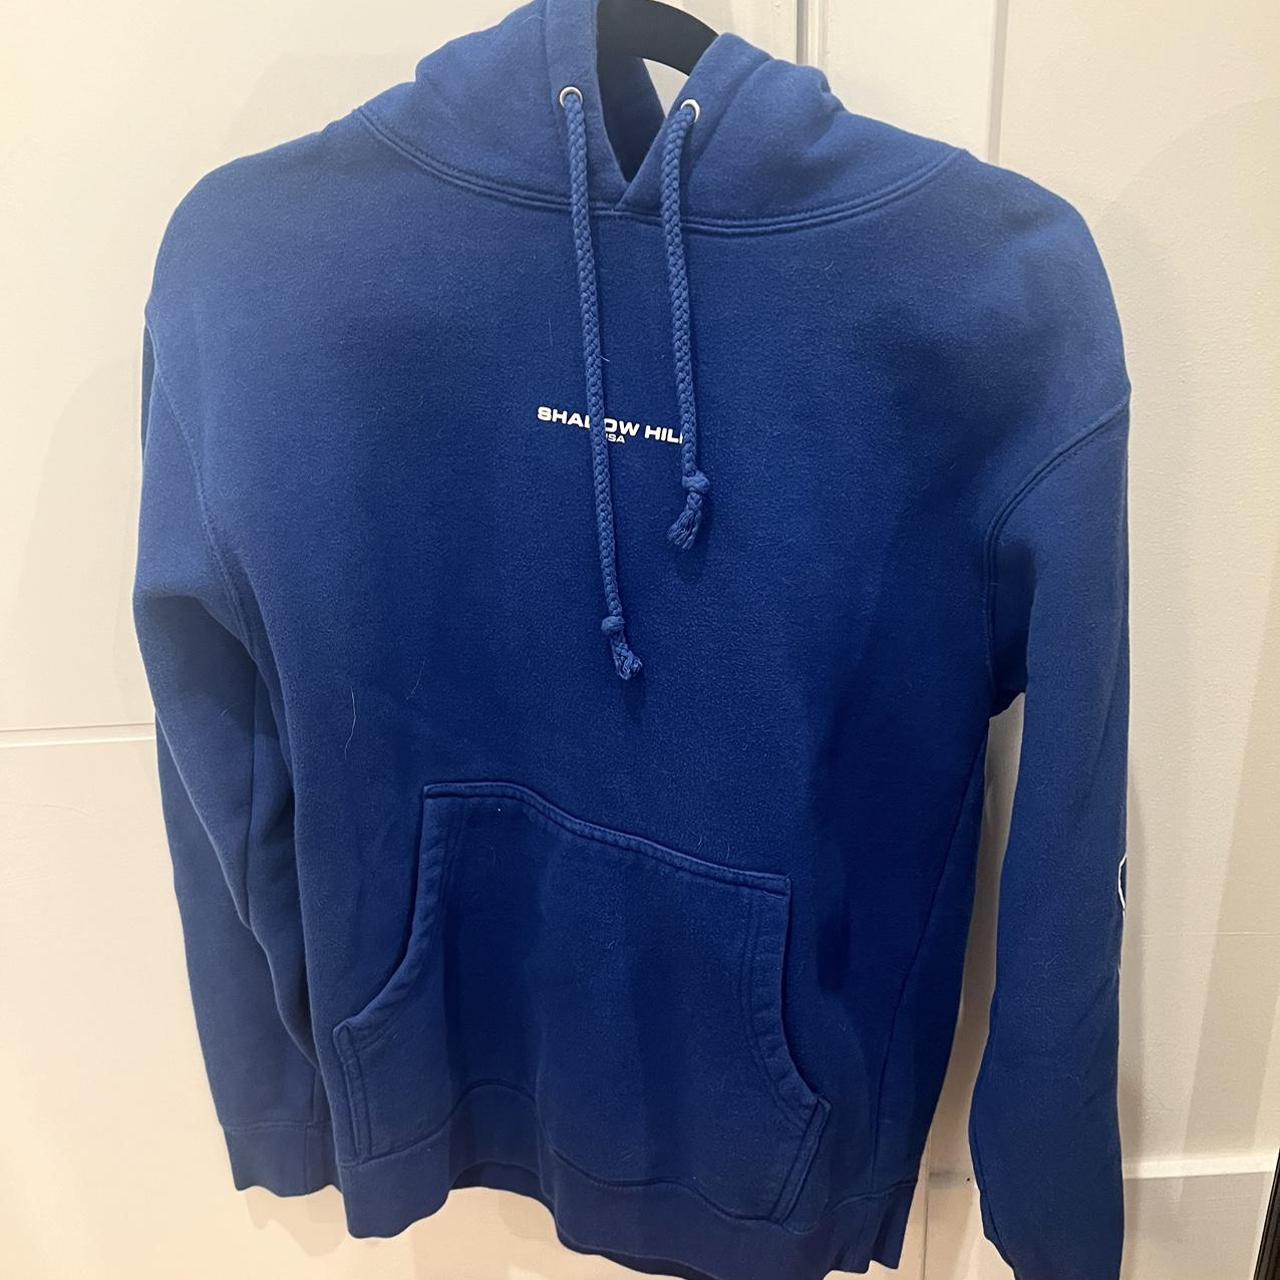 Shadow Hill hoodie - good condition - Depop